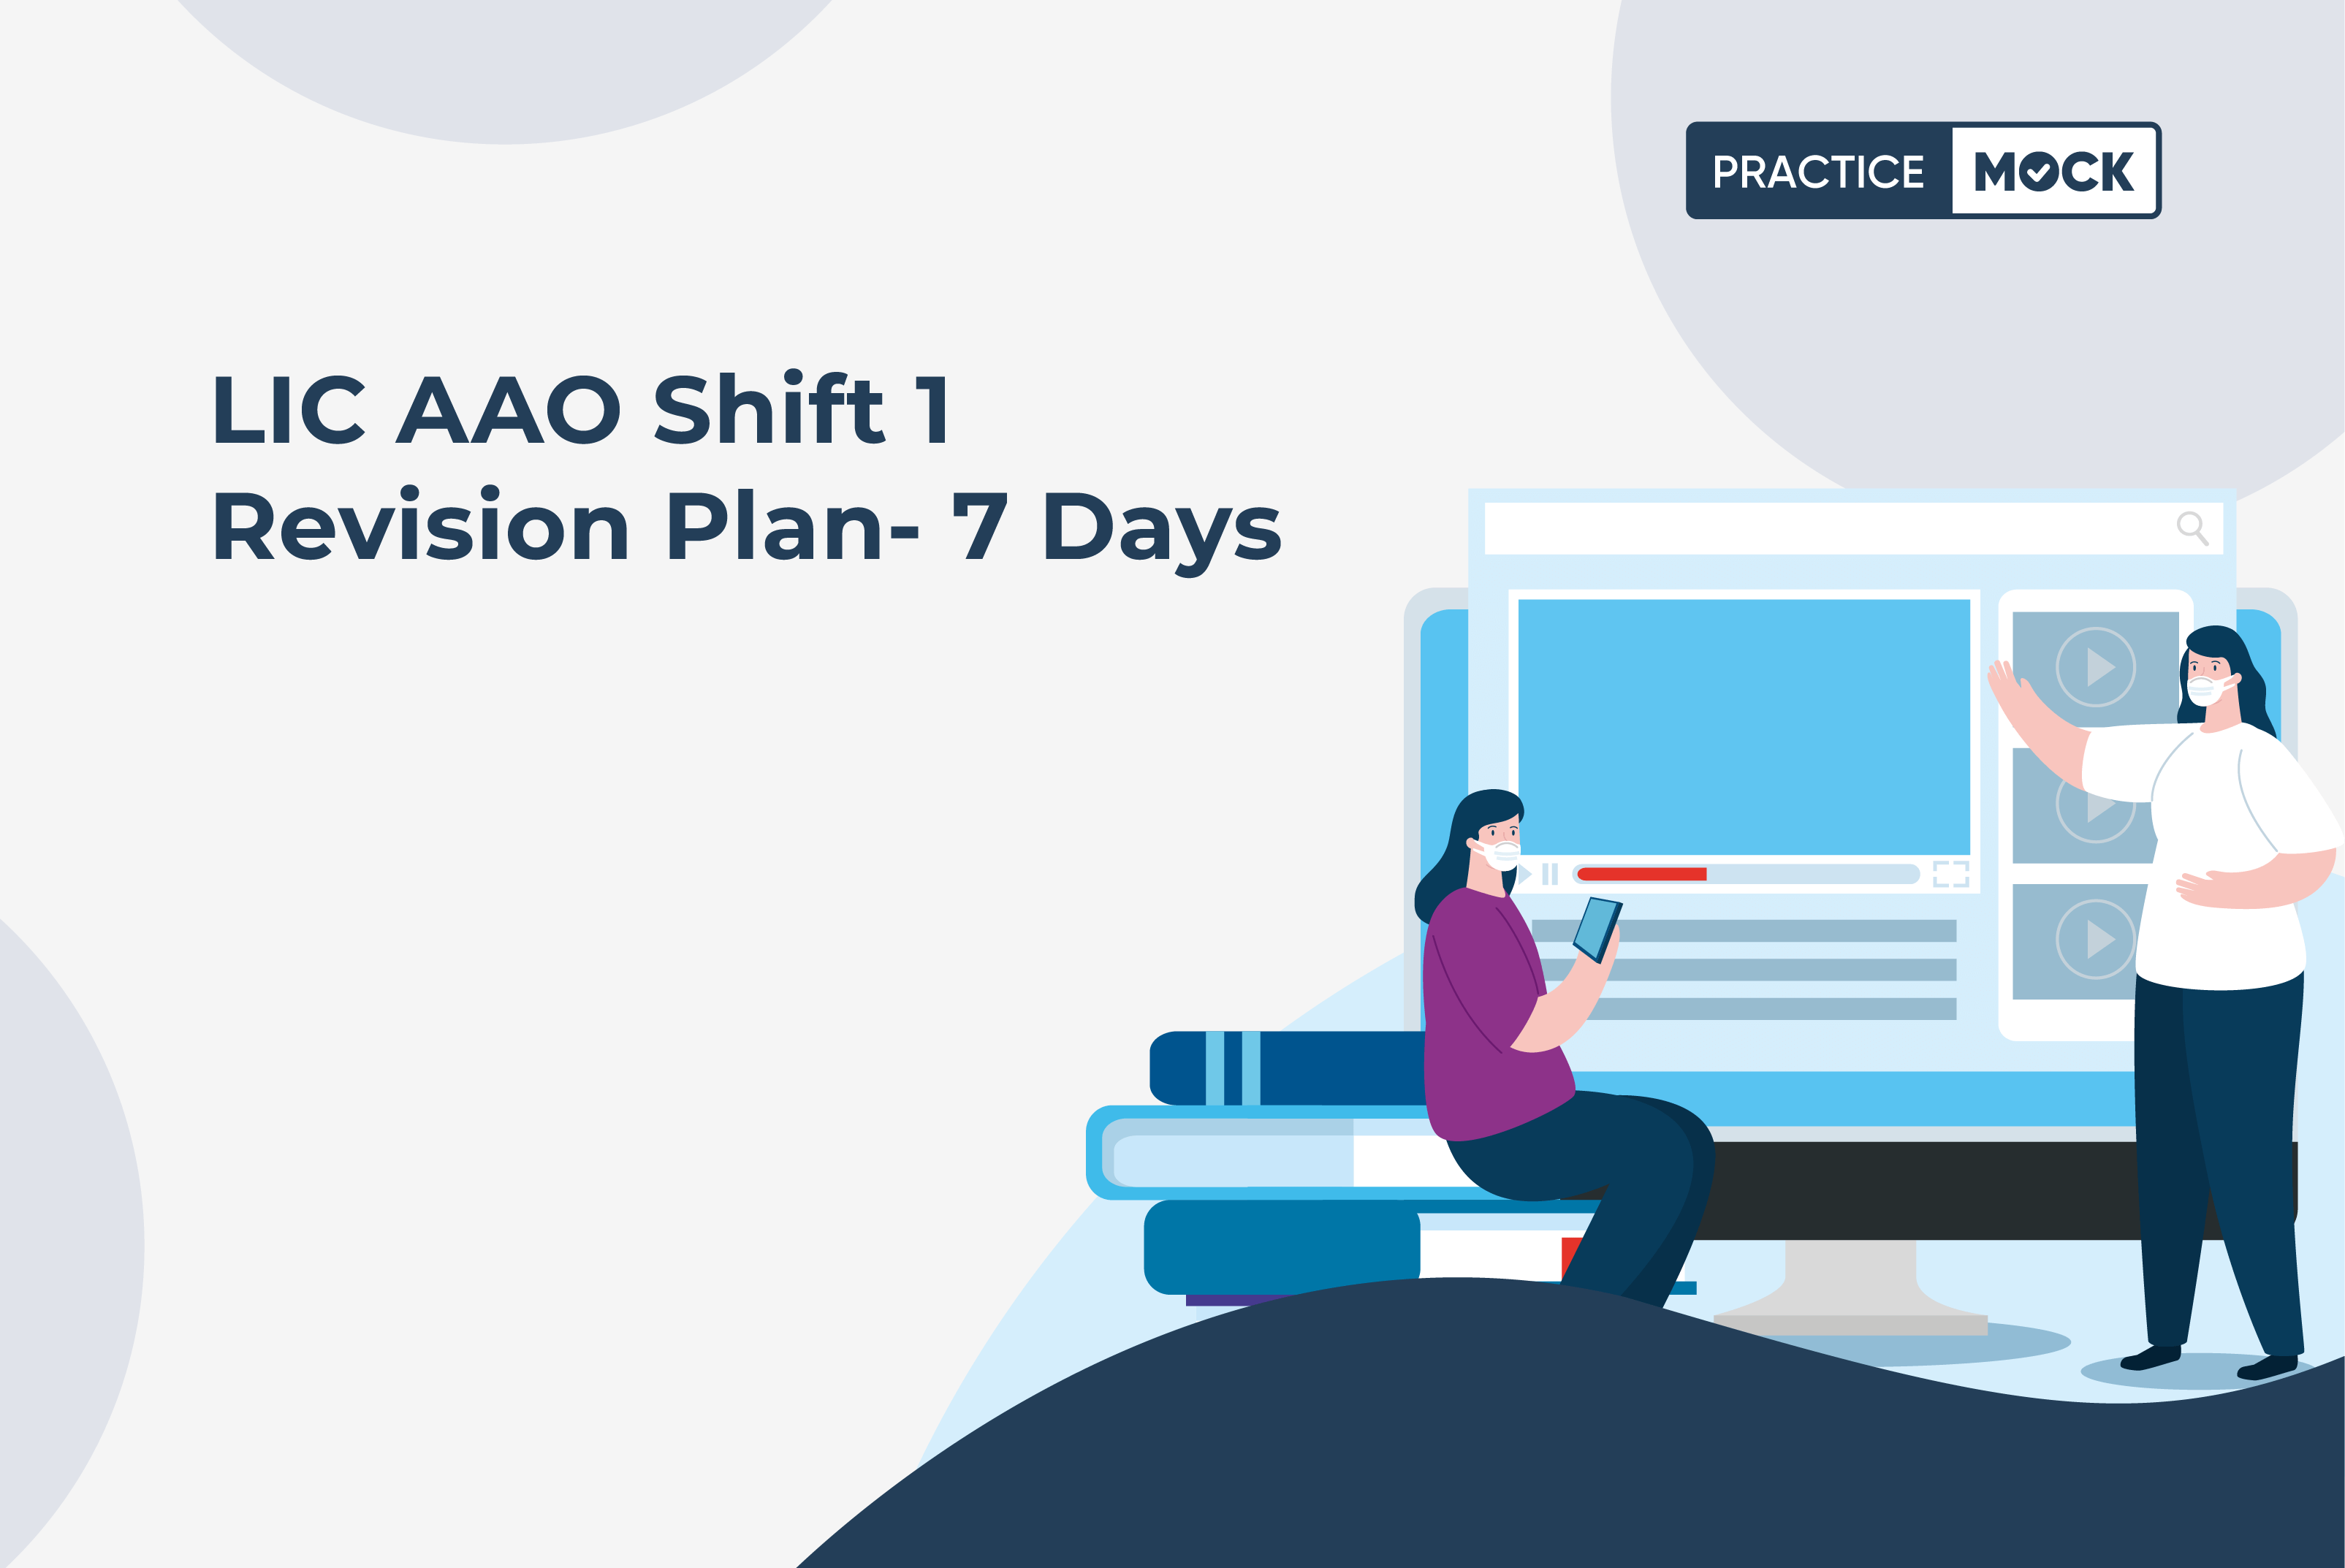 LIC AAO Shift 1 Revision Plan- 7 Days